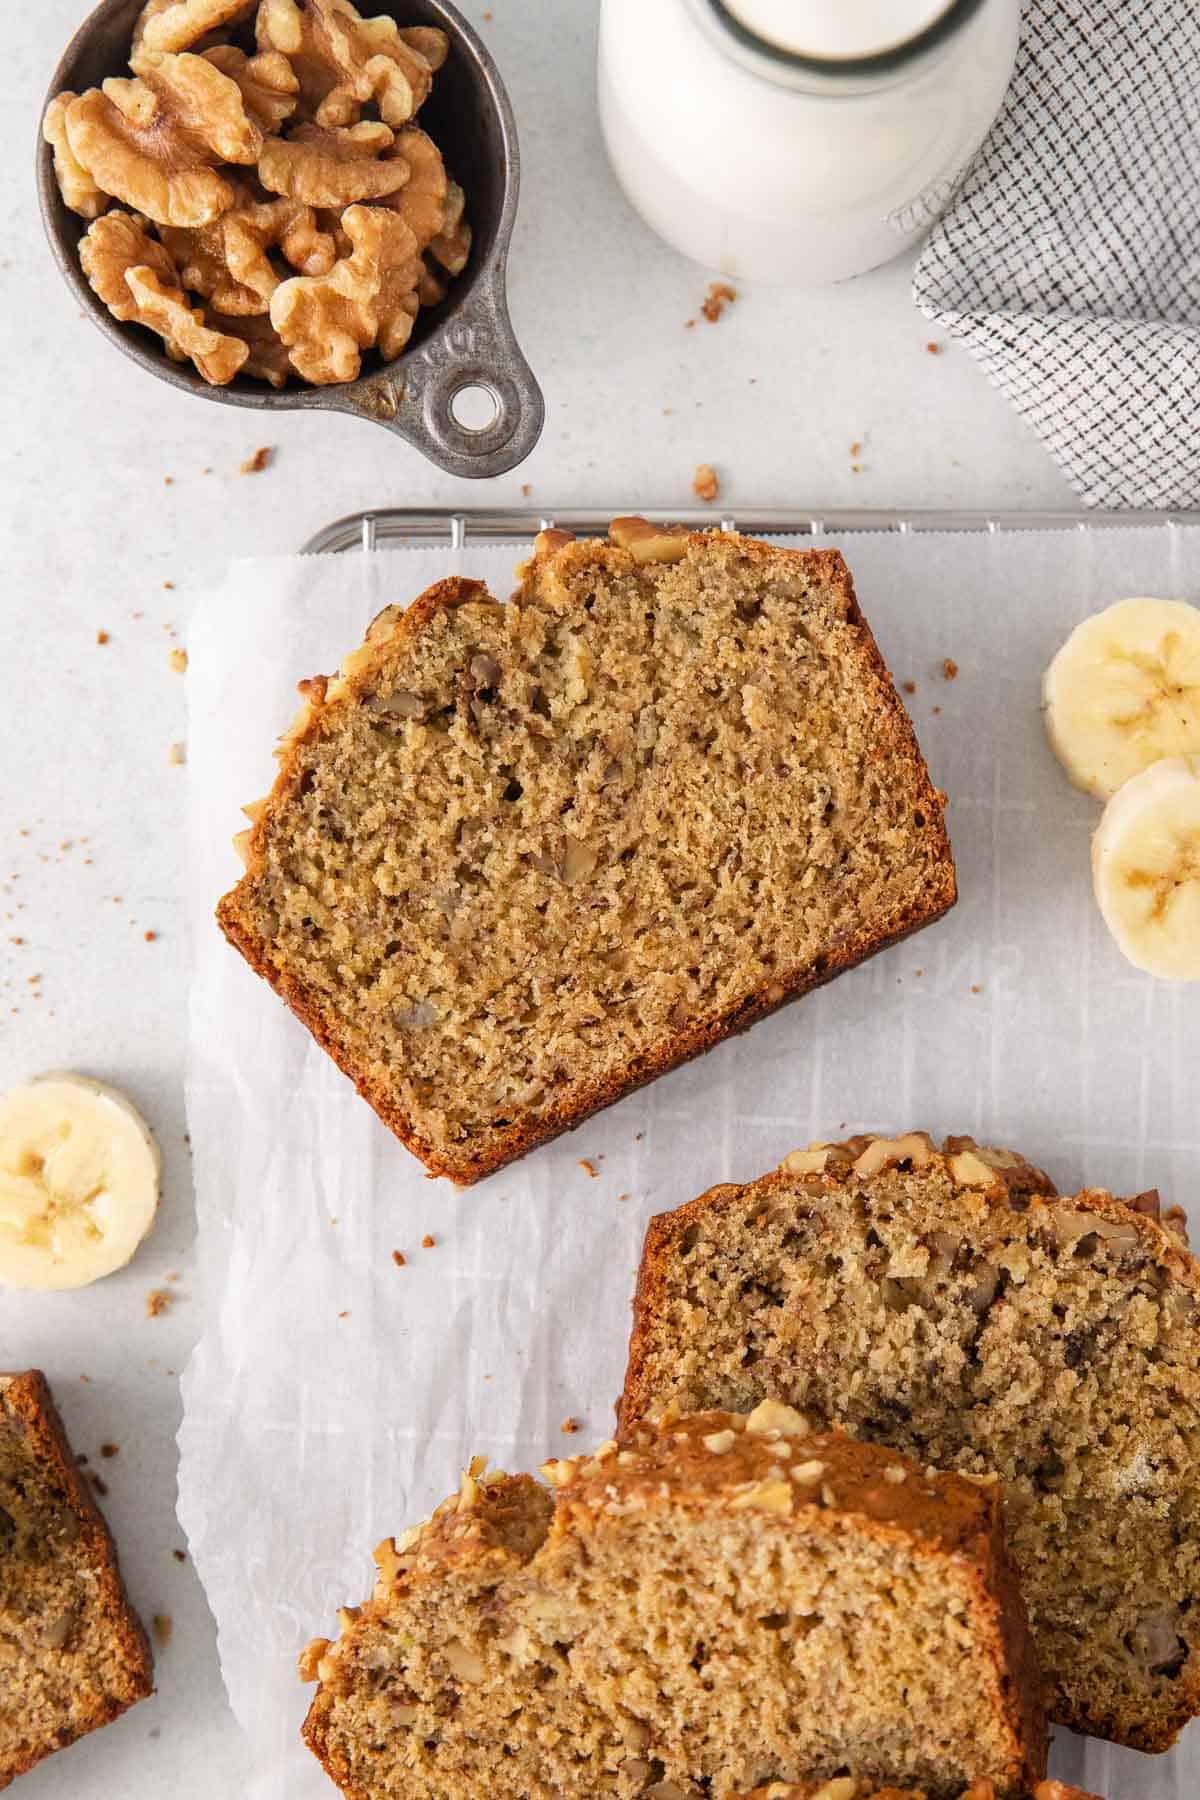 A sice of f oat flour banana bread on a piece of parchment